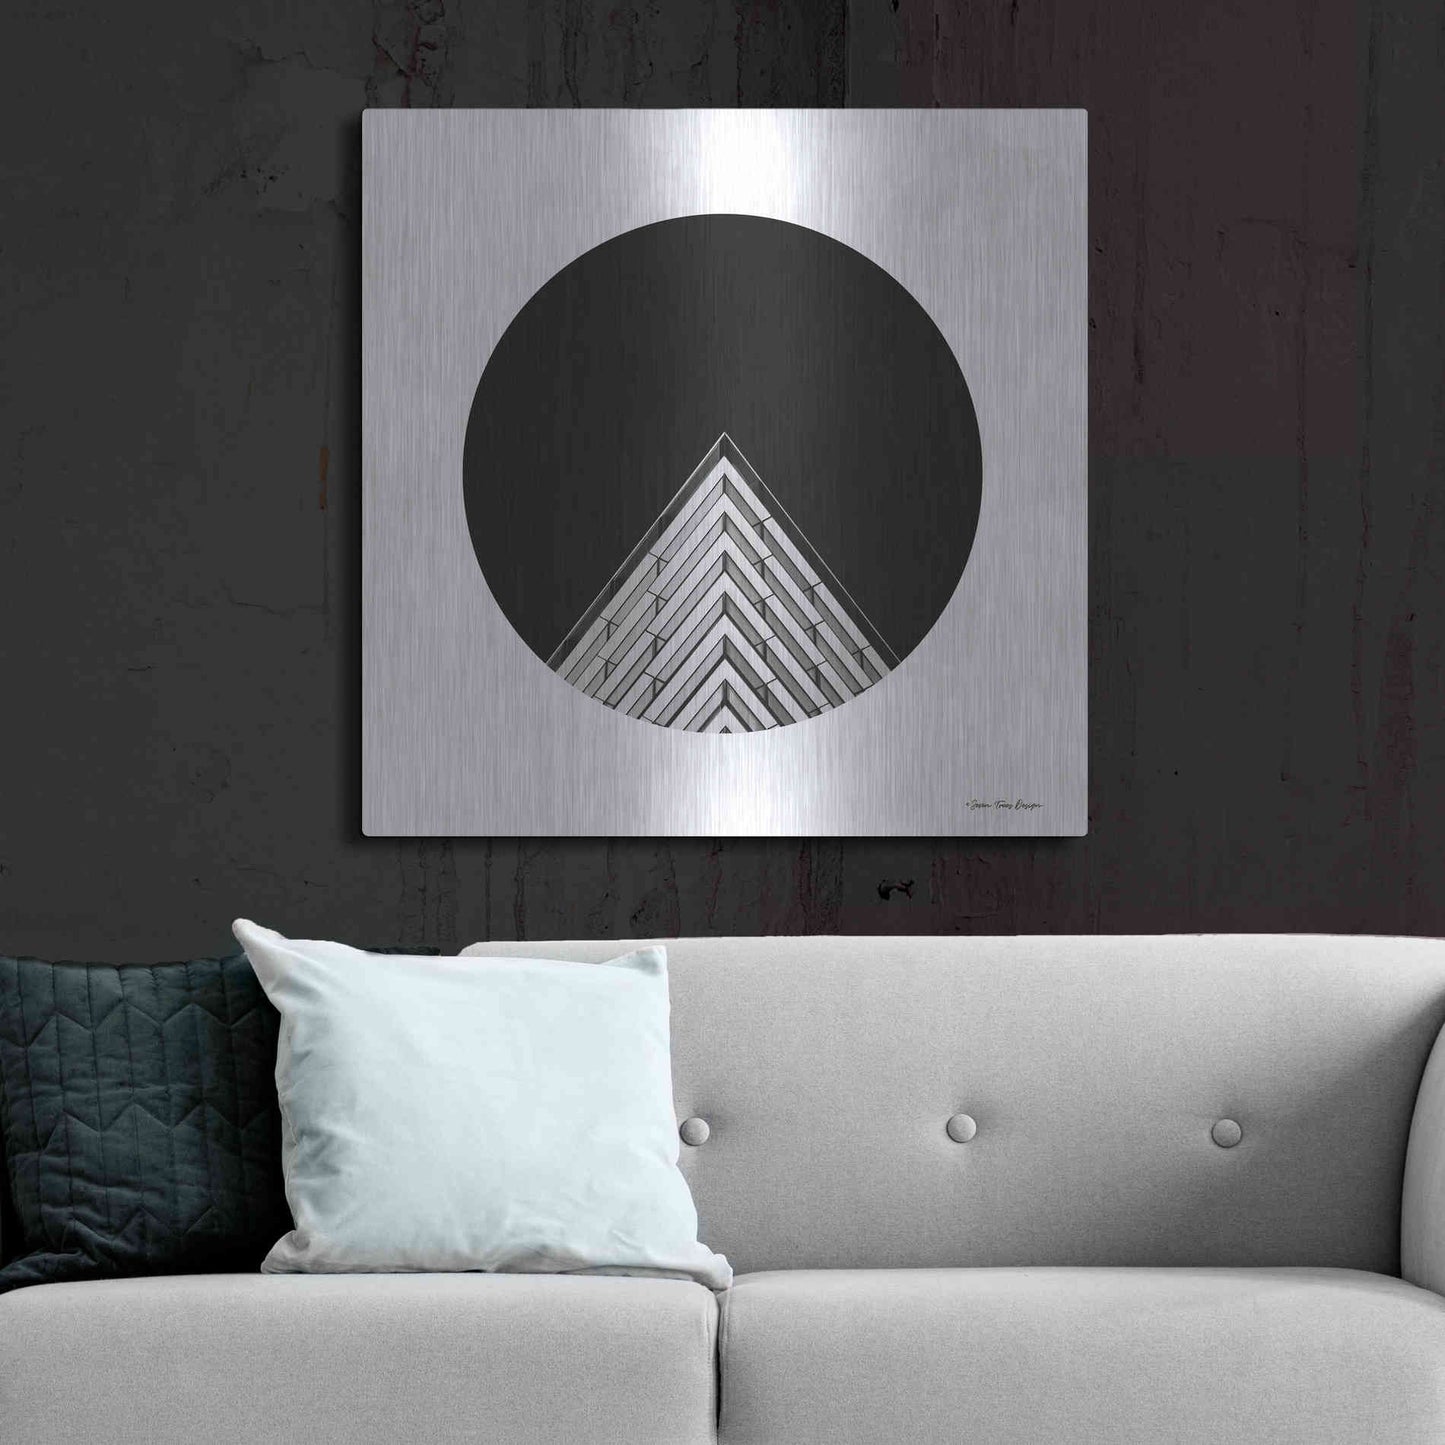 Luxe Metal Art 'Triangular Architecture' by Seven Trees Design, Metal Wall Art,36x36